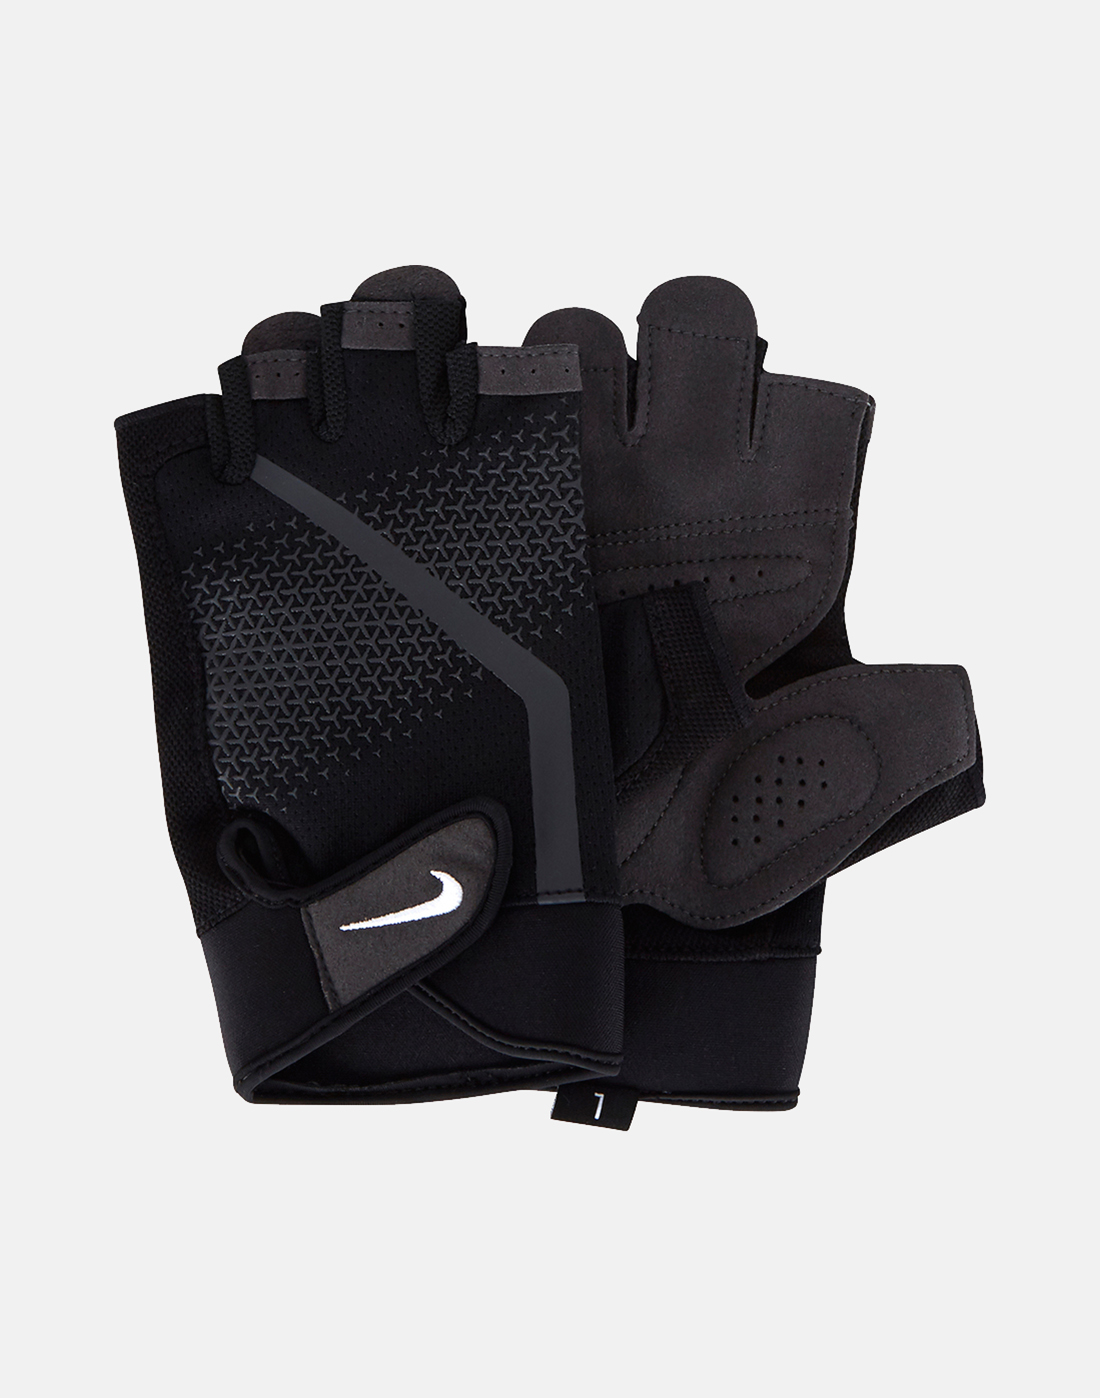 Nike Adults Extreme Gloves - Black | Life Style Sports IE